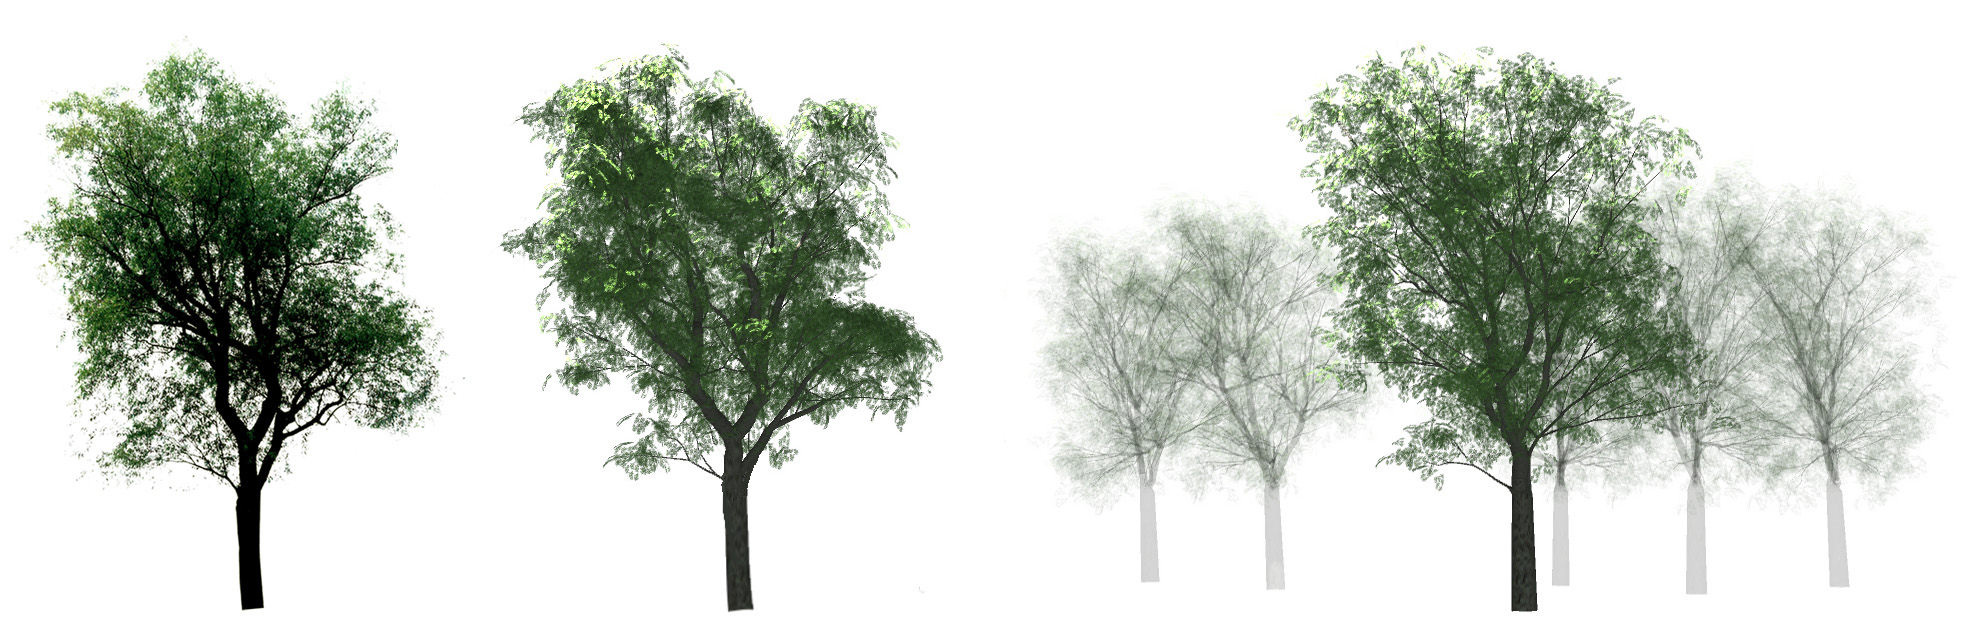 Teaser of Modeling and Generating Moving Trees from Video